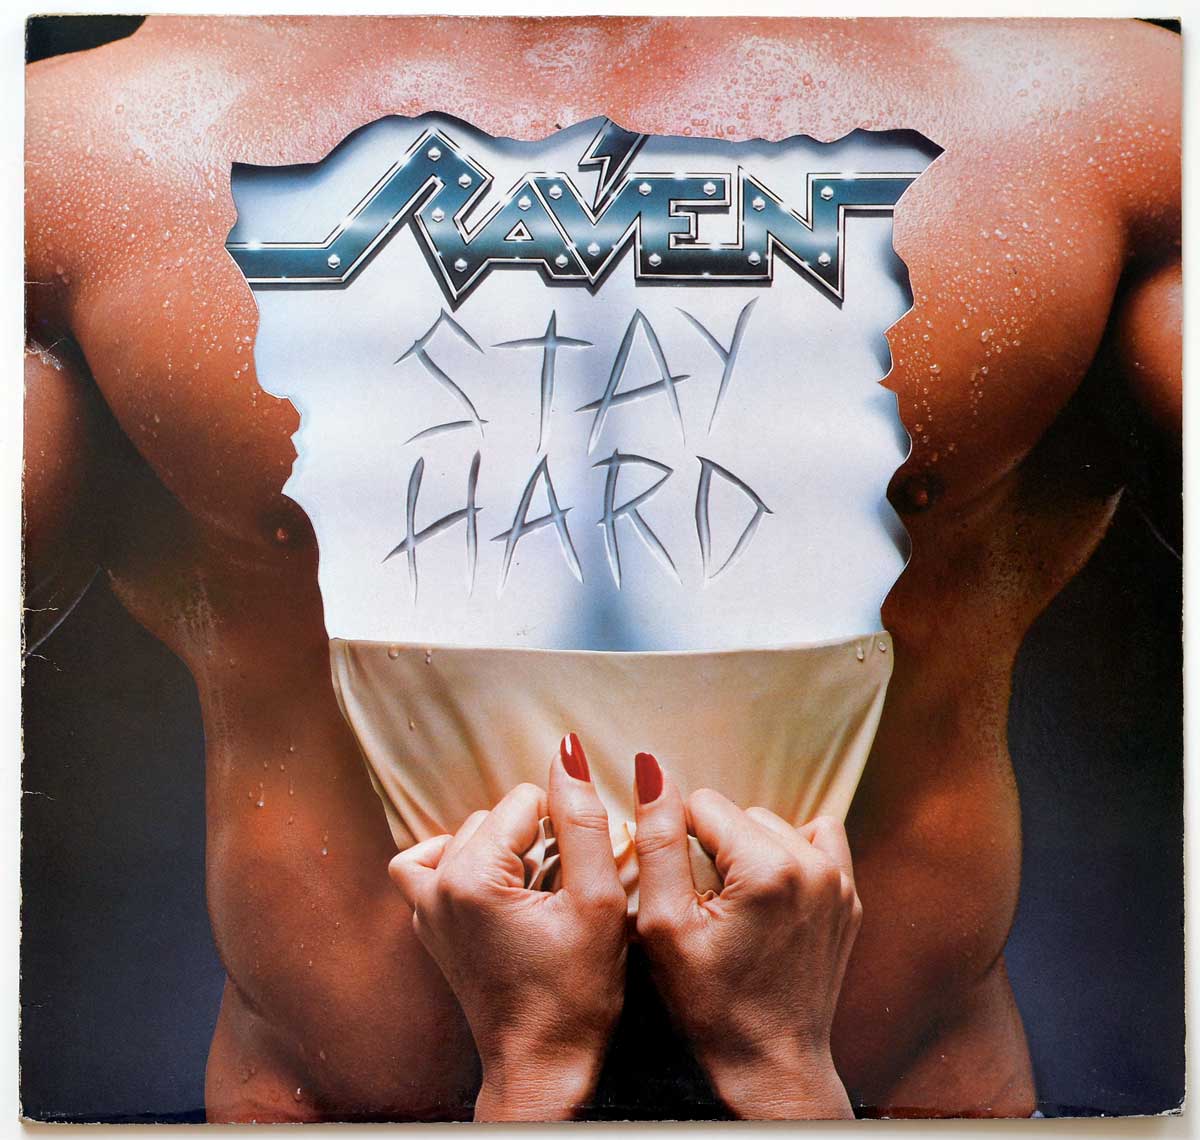 High Quality Photo of Album Front Cover  "RAVEN - STAY HARD"